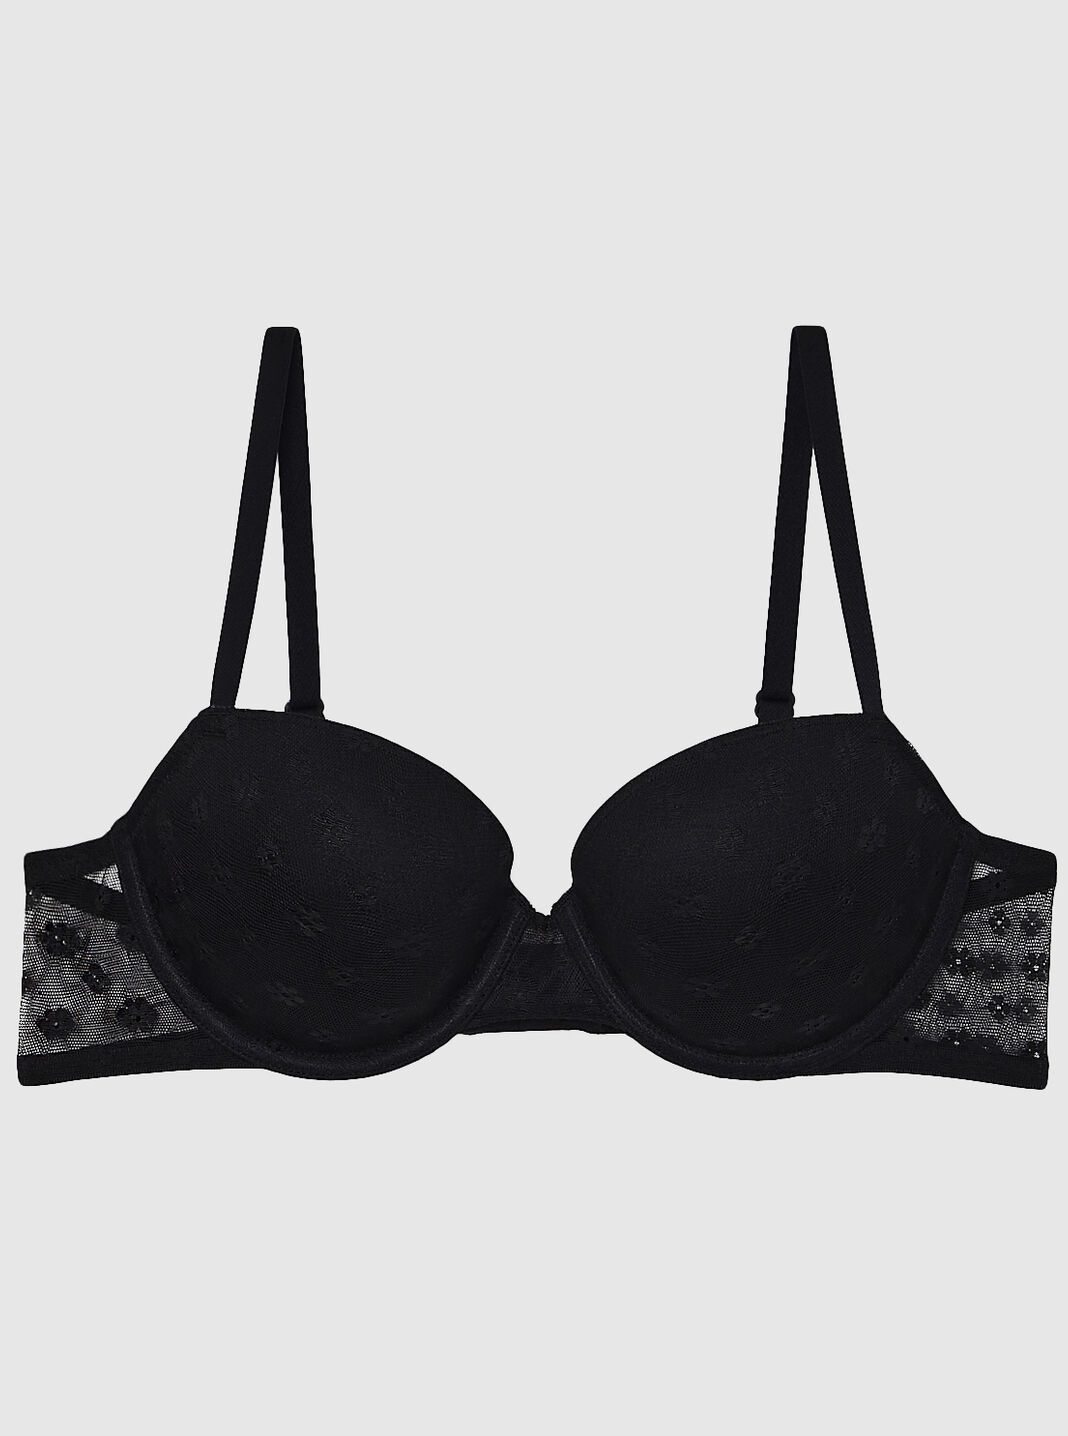 ZHANGZONG Camilace Comfort Wireless Front CZHANGZONG Bra, Front  CZHANGZONGre Posture Corrector Seamless Full Coverage Bra for Women : Buy  Online at Best Price in KSA - Souq is now : Fashion